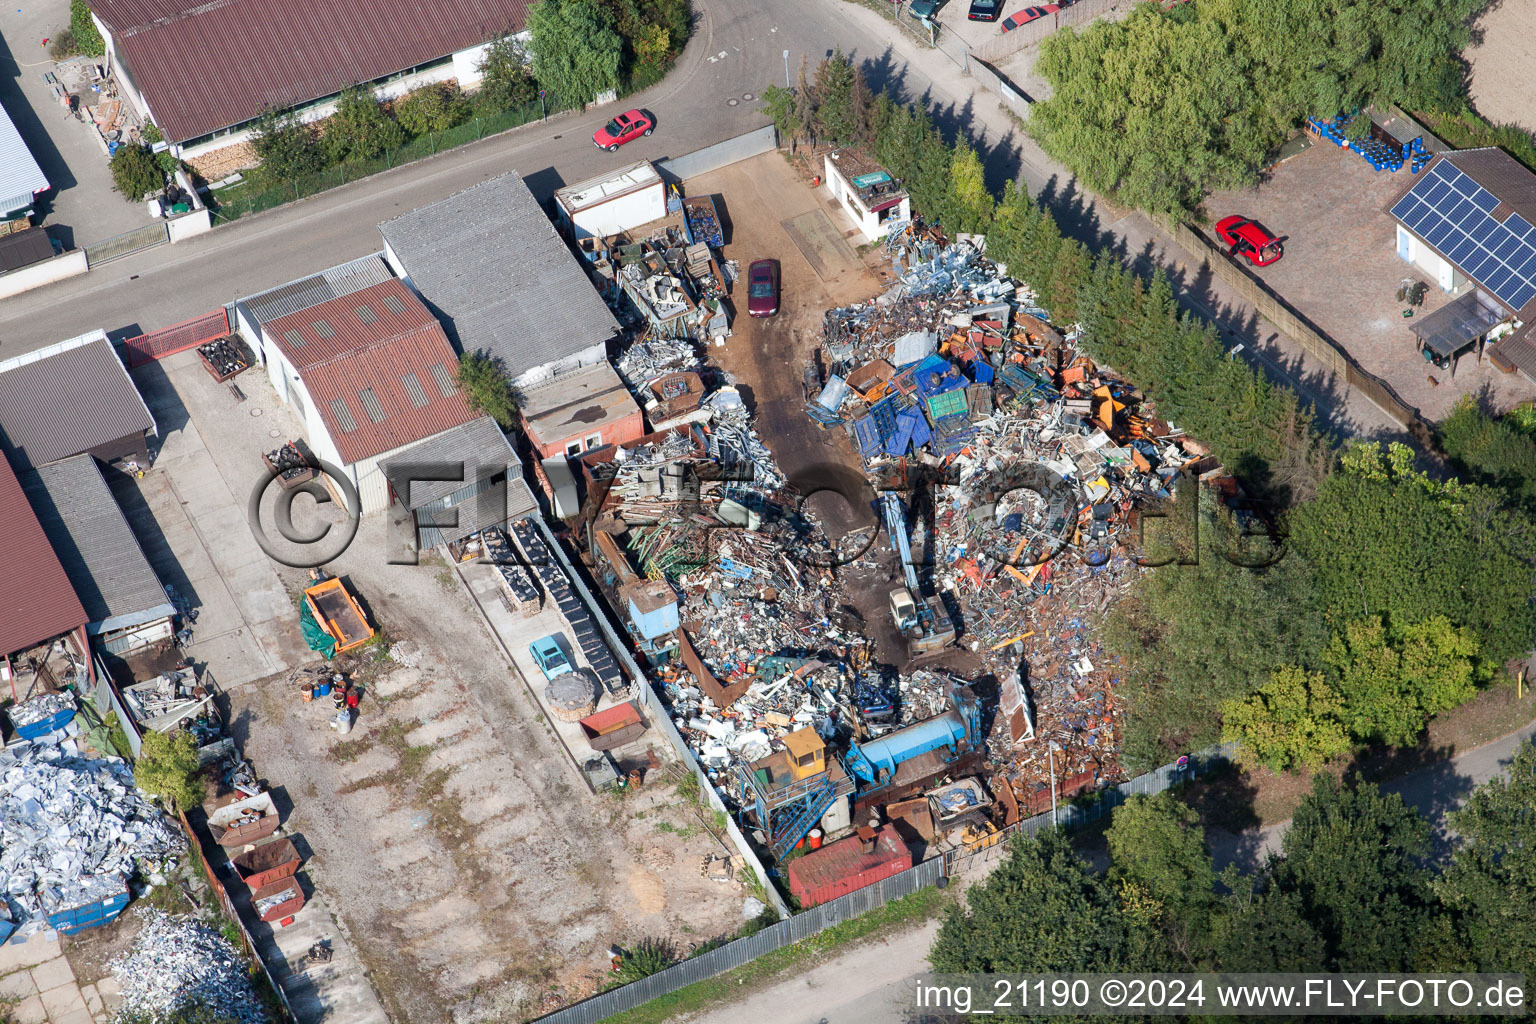 Scrapyard for recycling of metal of S&M Recycling Linde in Hoerdt in the state Rhineland-Palatinate